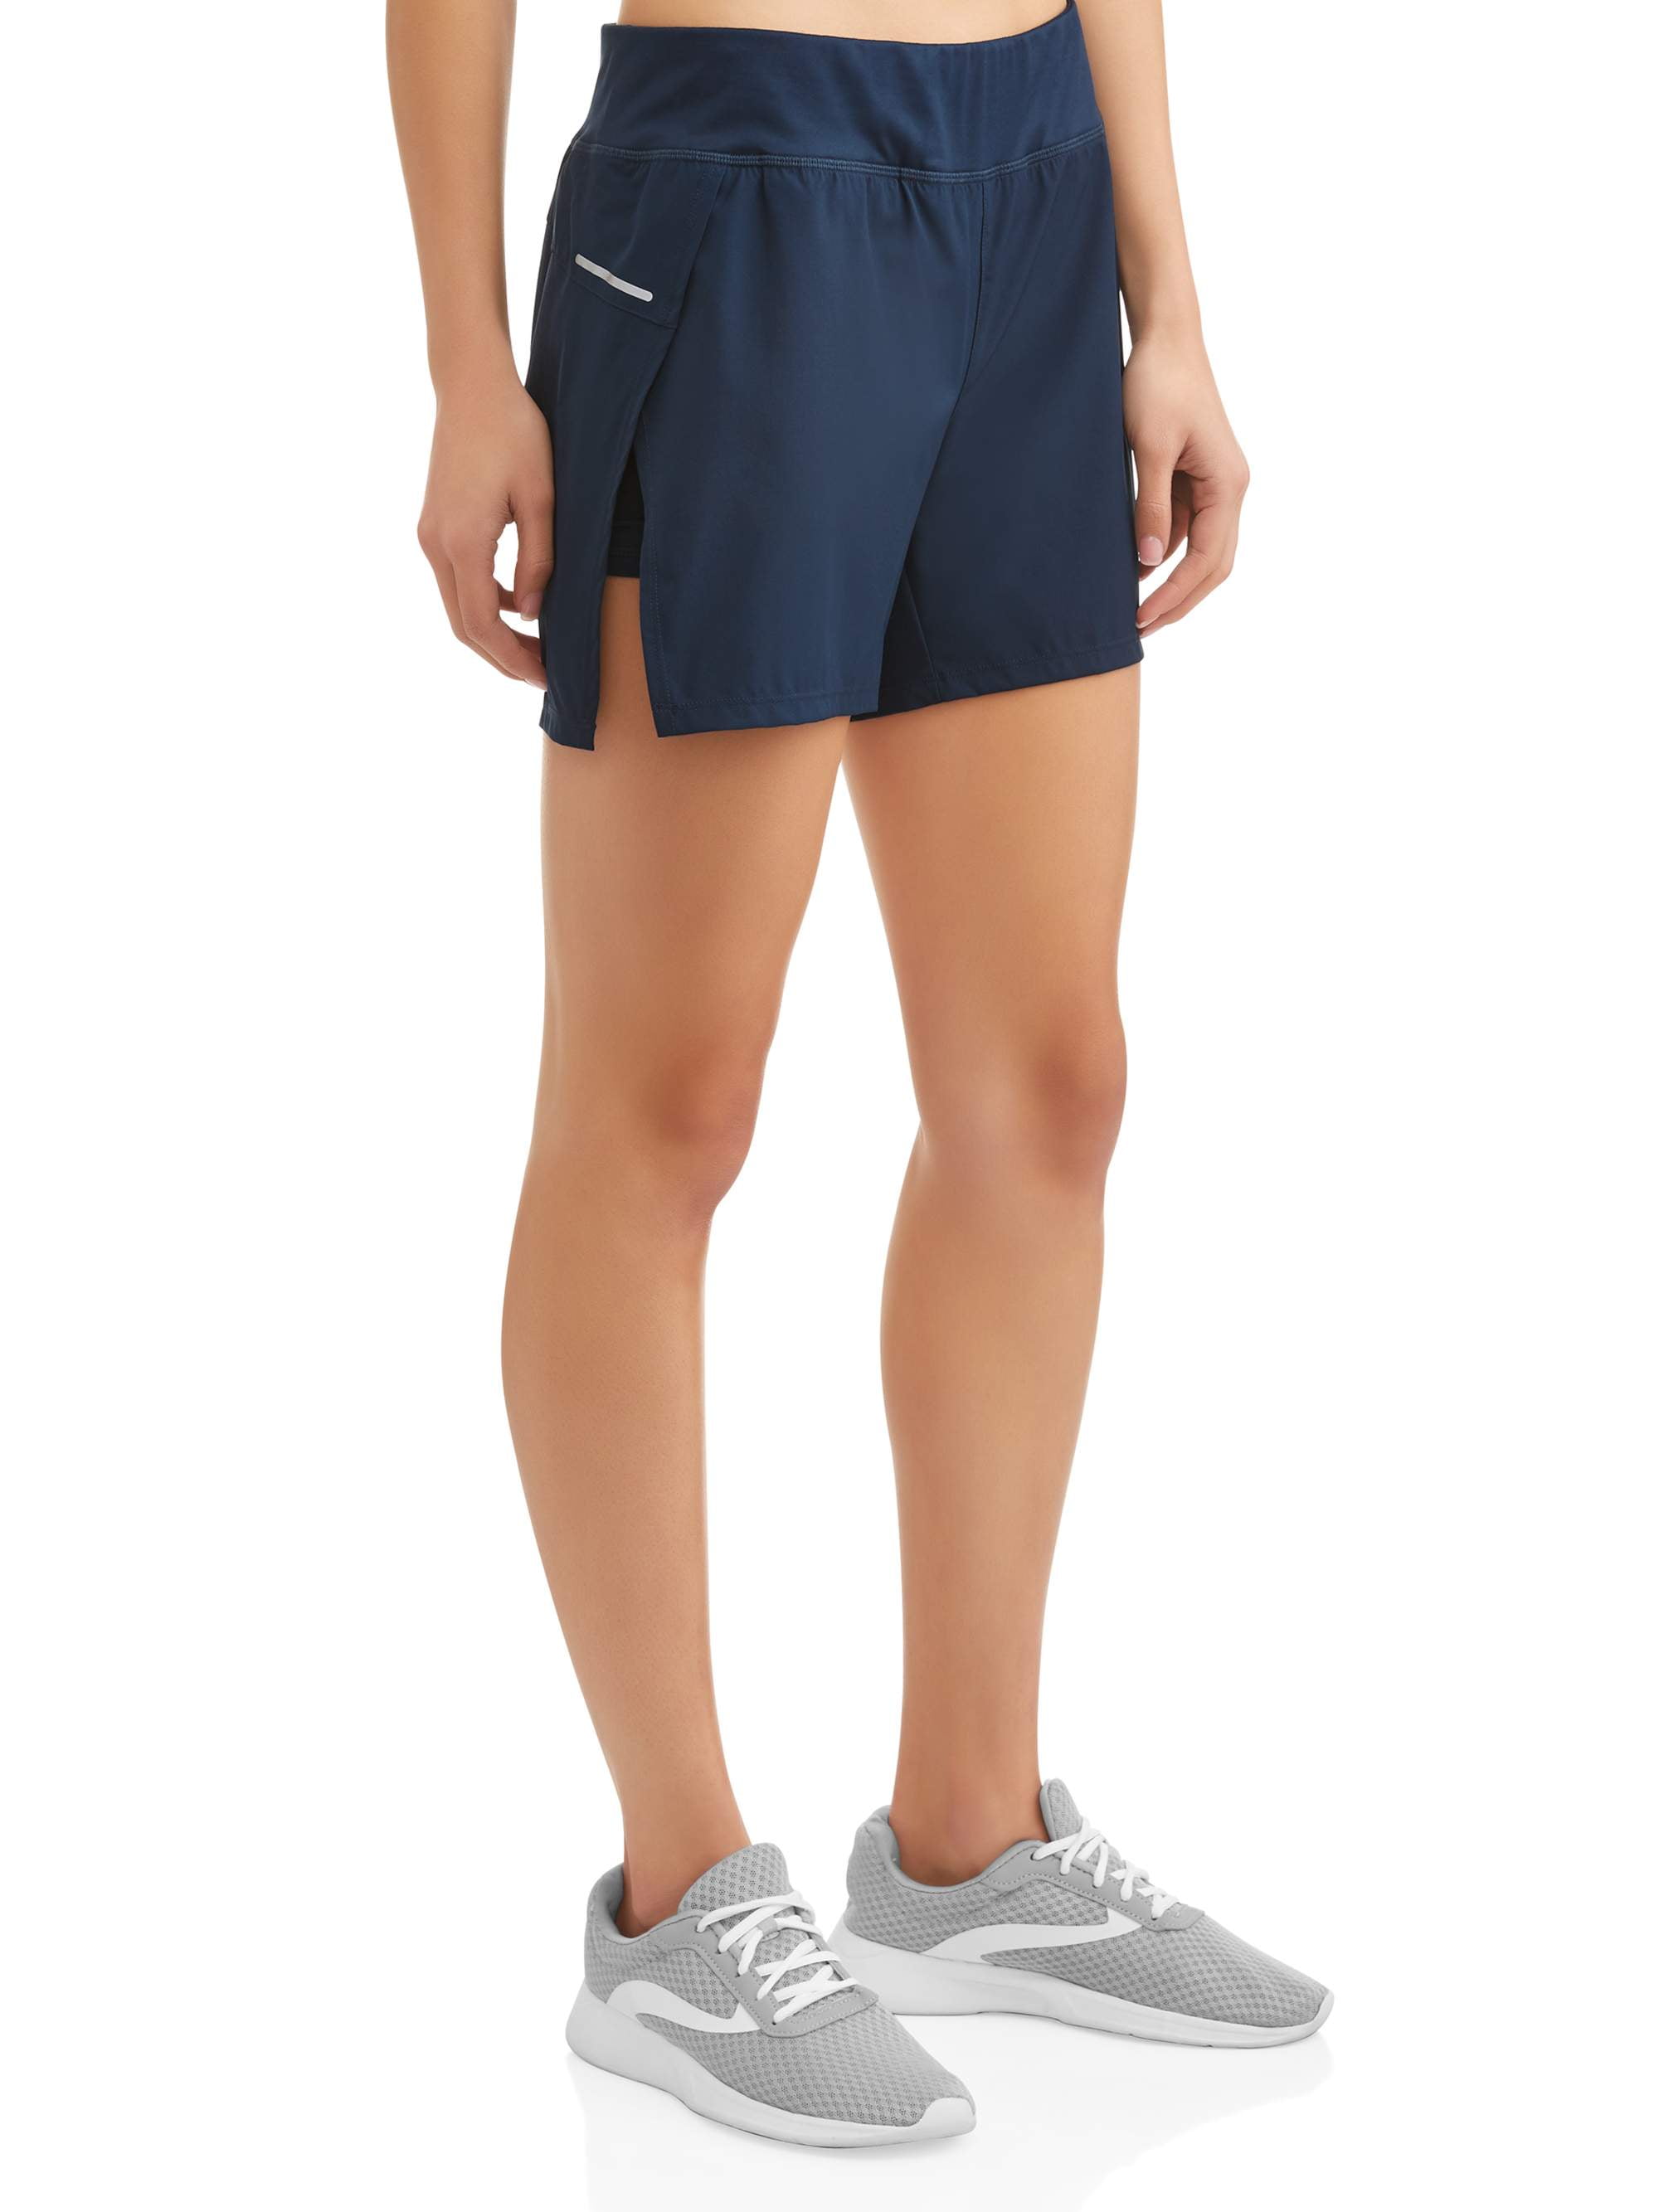 Simple Avia workout shorts with Comfort Workout Clothes